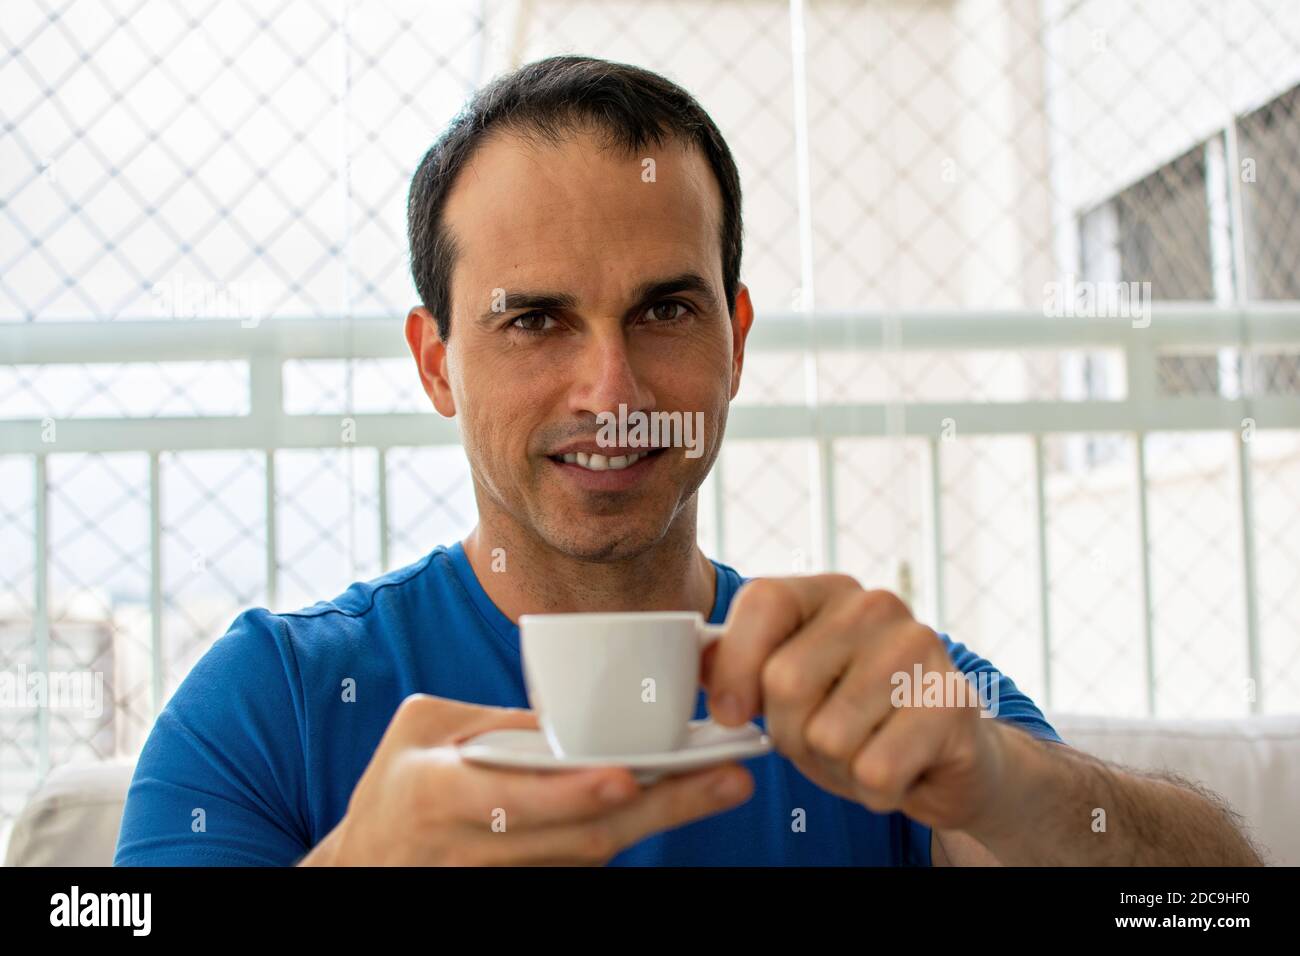 Smiling man offering a cup of coffee. Stock Photo